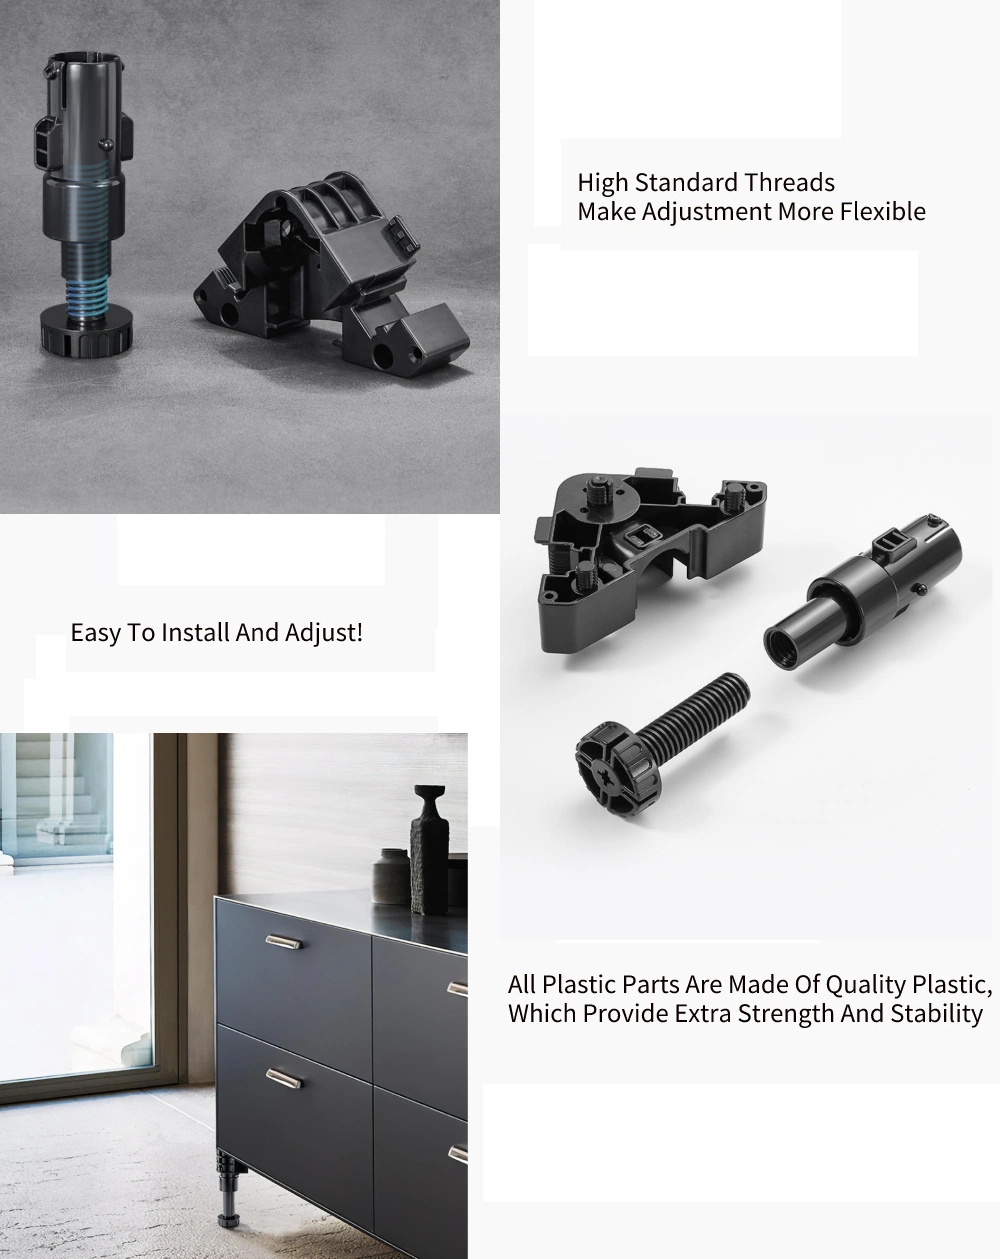 Adjustable Cabient Feet in Plastic with 90-180mm Foldable for Floor Cabinets